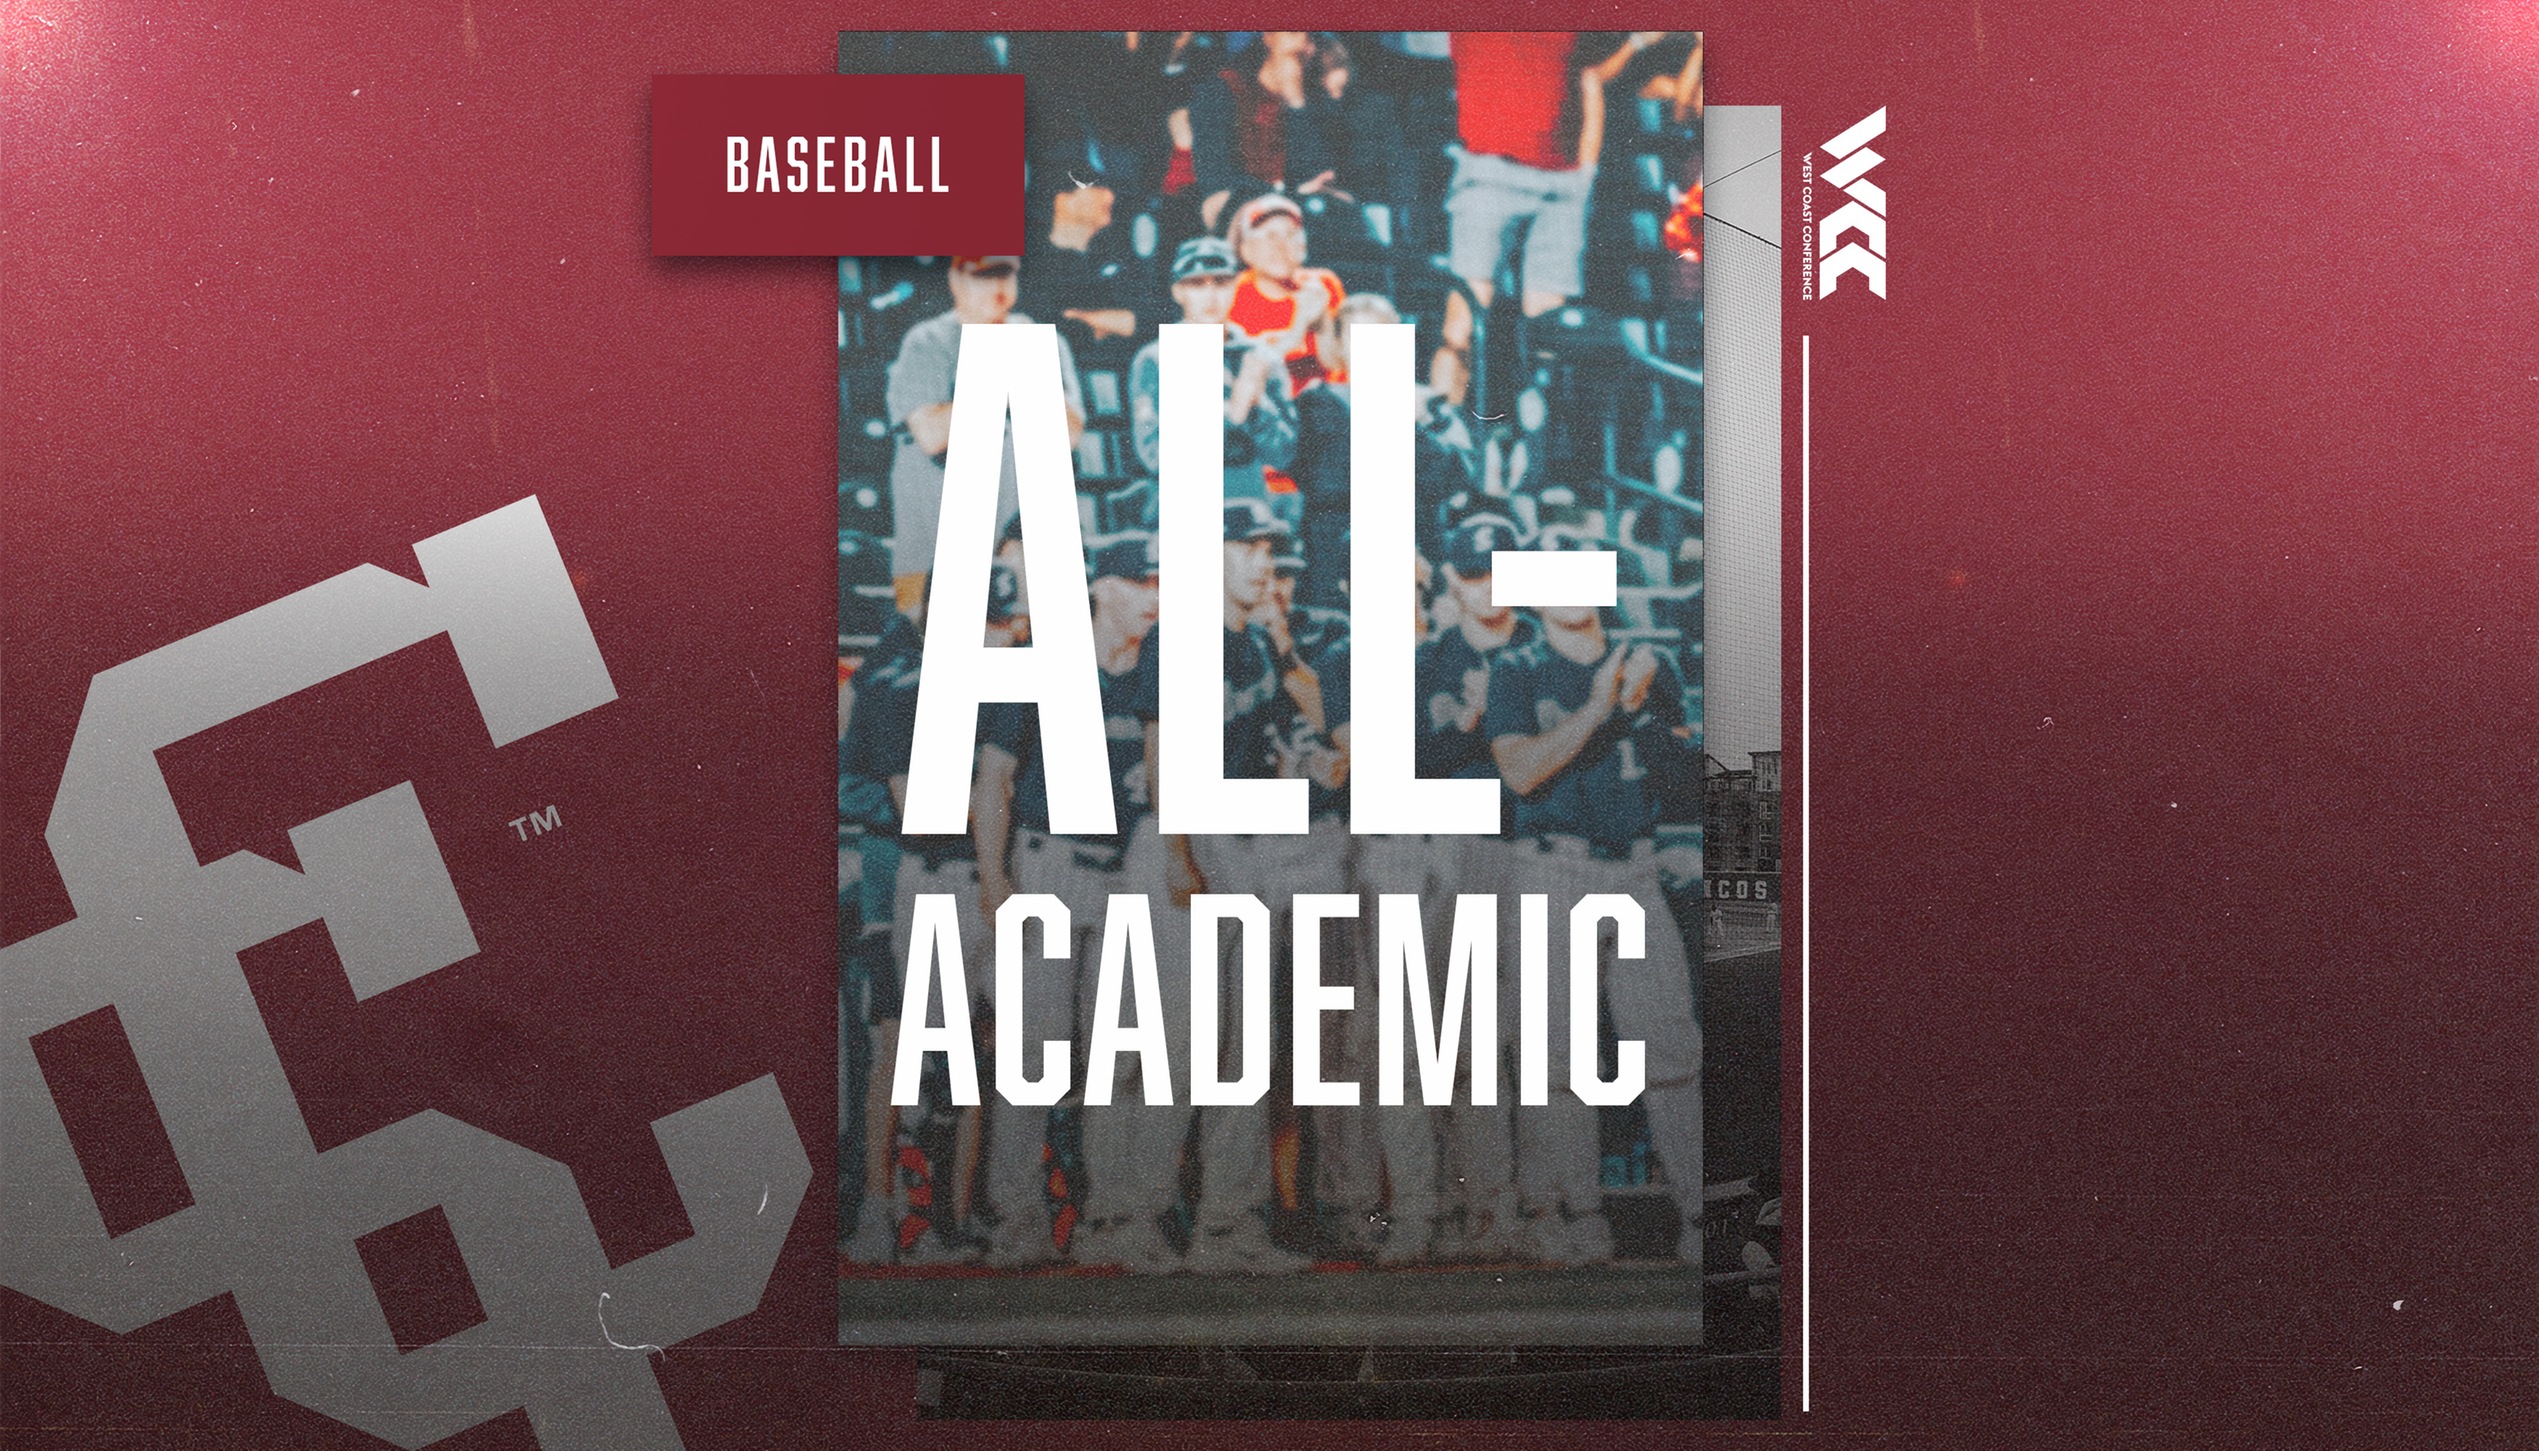 Baseball Has Seven Honored by WCC for Academic Work